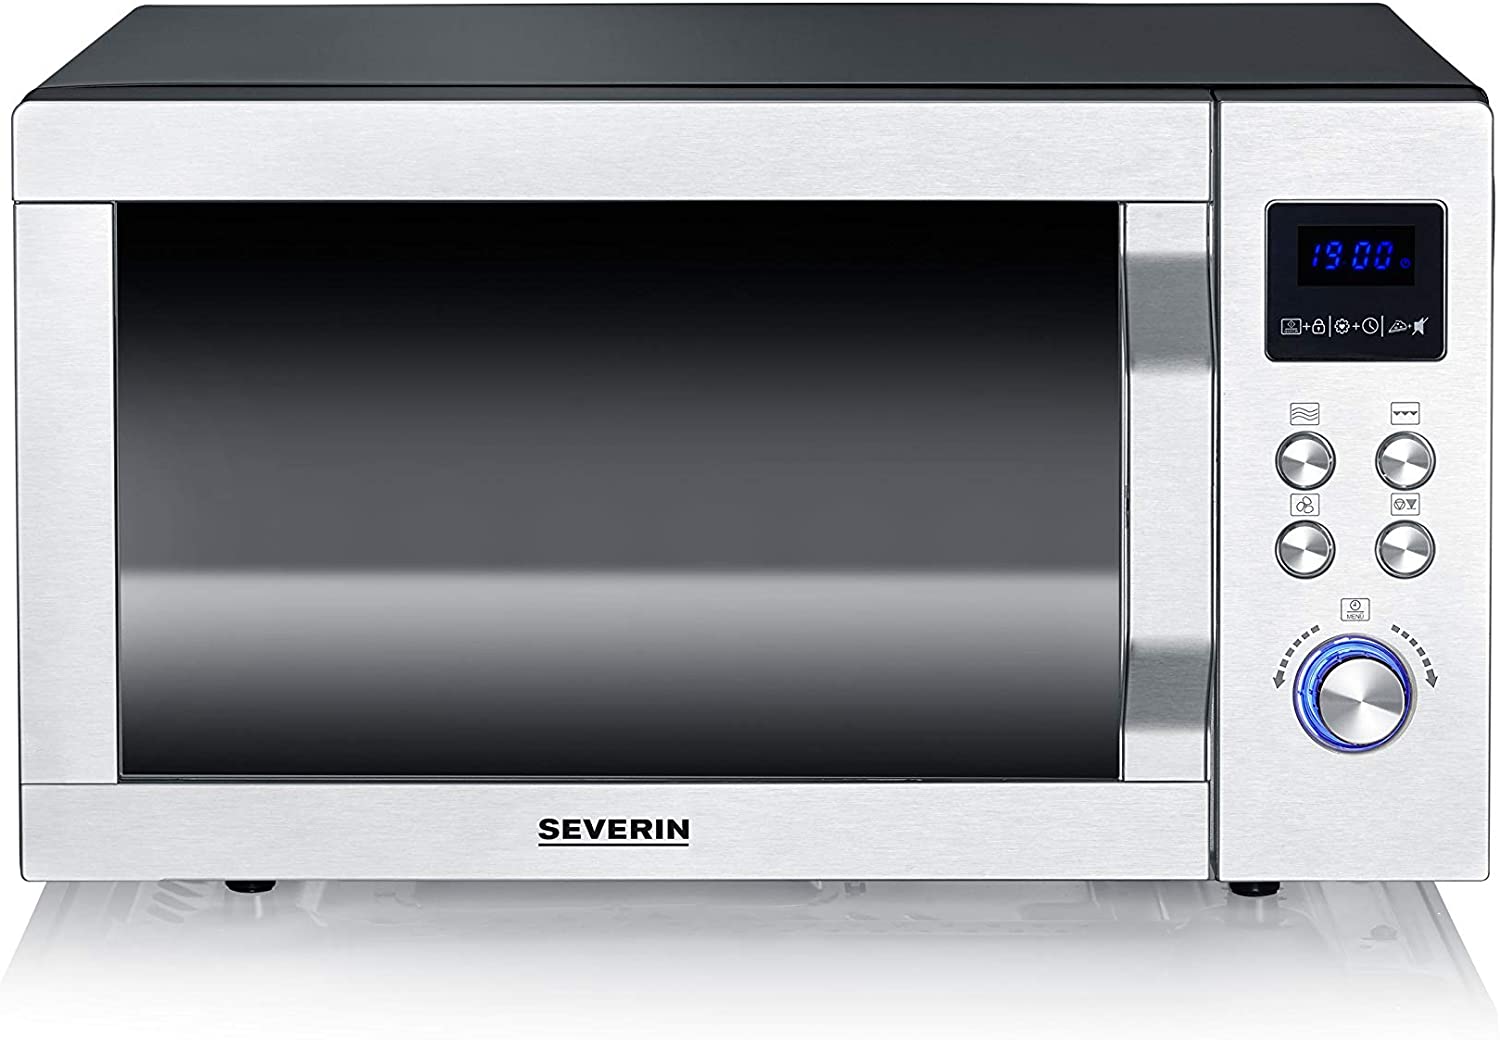 Severin MW 7759 4-in-1 Microwave Oven with Double Grill, Convection and Pizza Express Function, 230°C Oven Function, Non-Stick Coated Turntable Plate, Capacity 25 L, Stainless Steel Matte Black